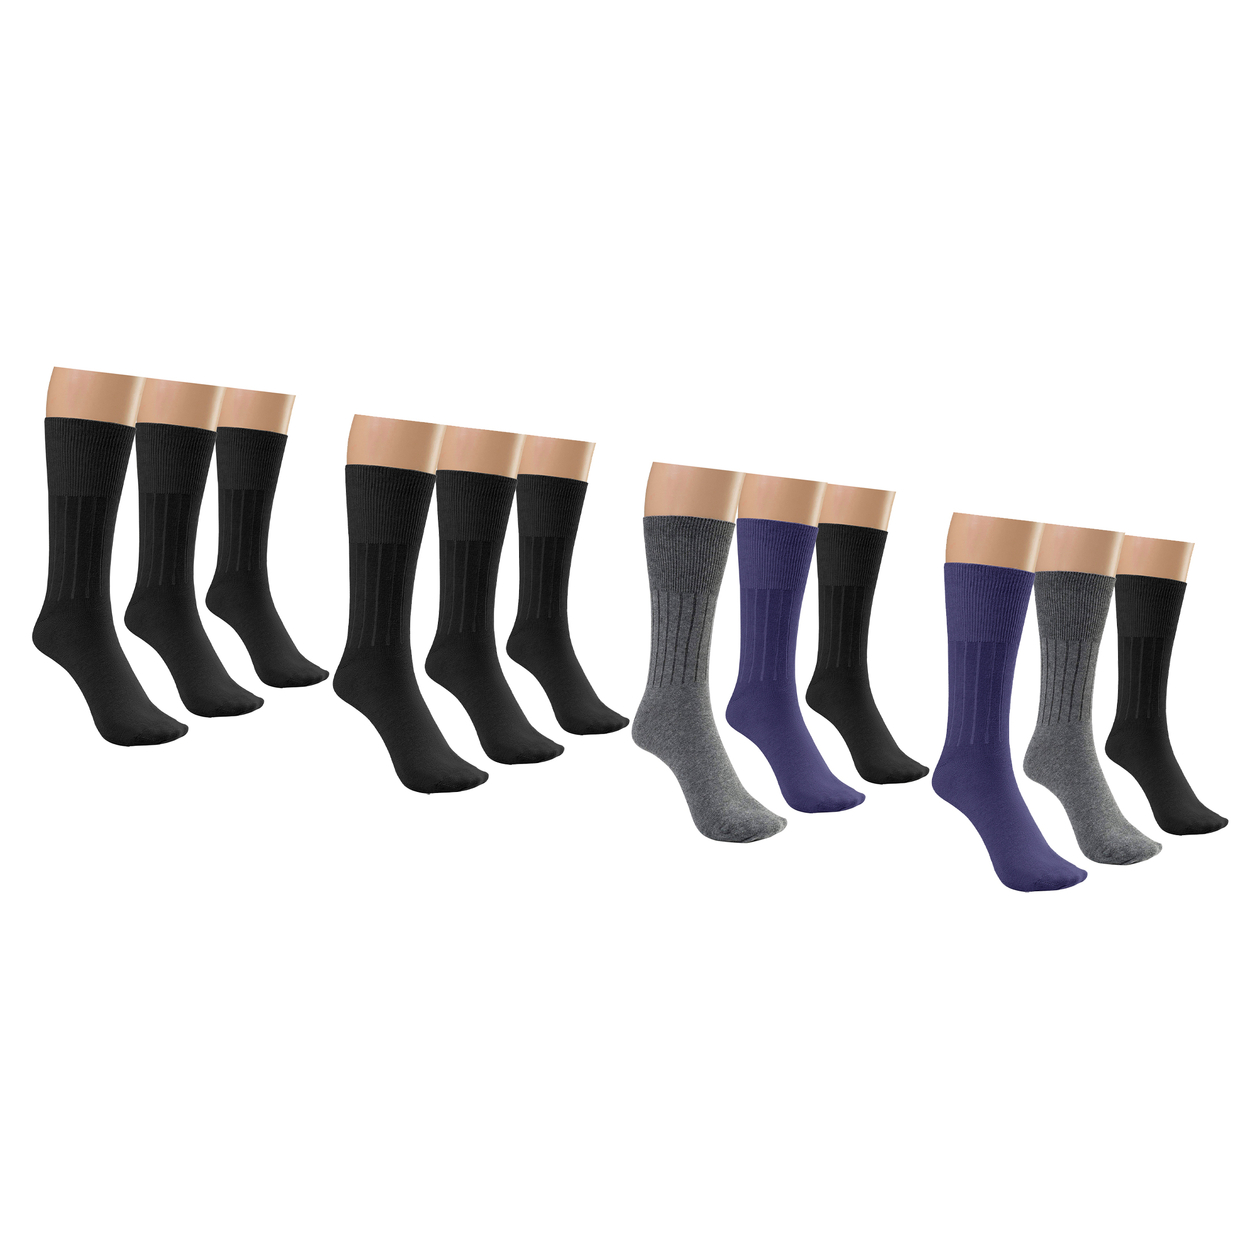 9-Pairs: Physician Approved Non-Binding Diabetic Circulatory Comfortable Moisture Wicking Dress Socks - Black